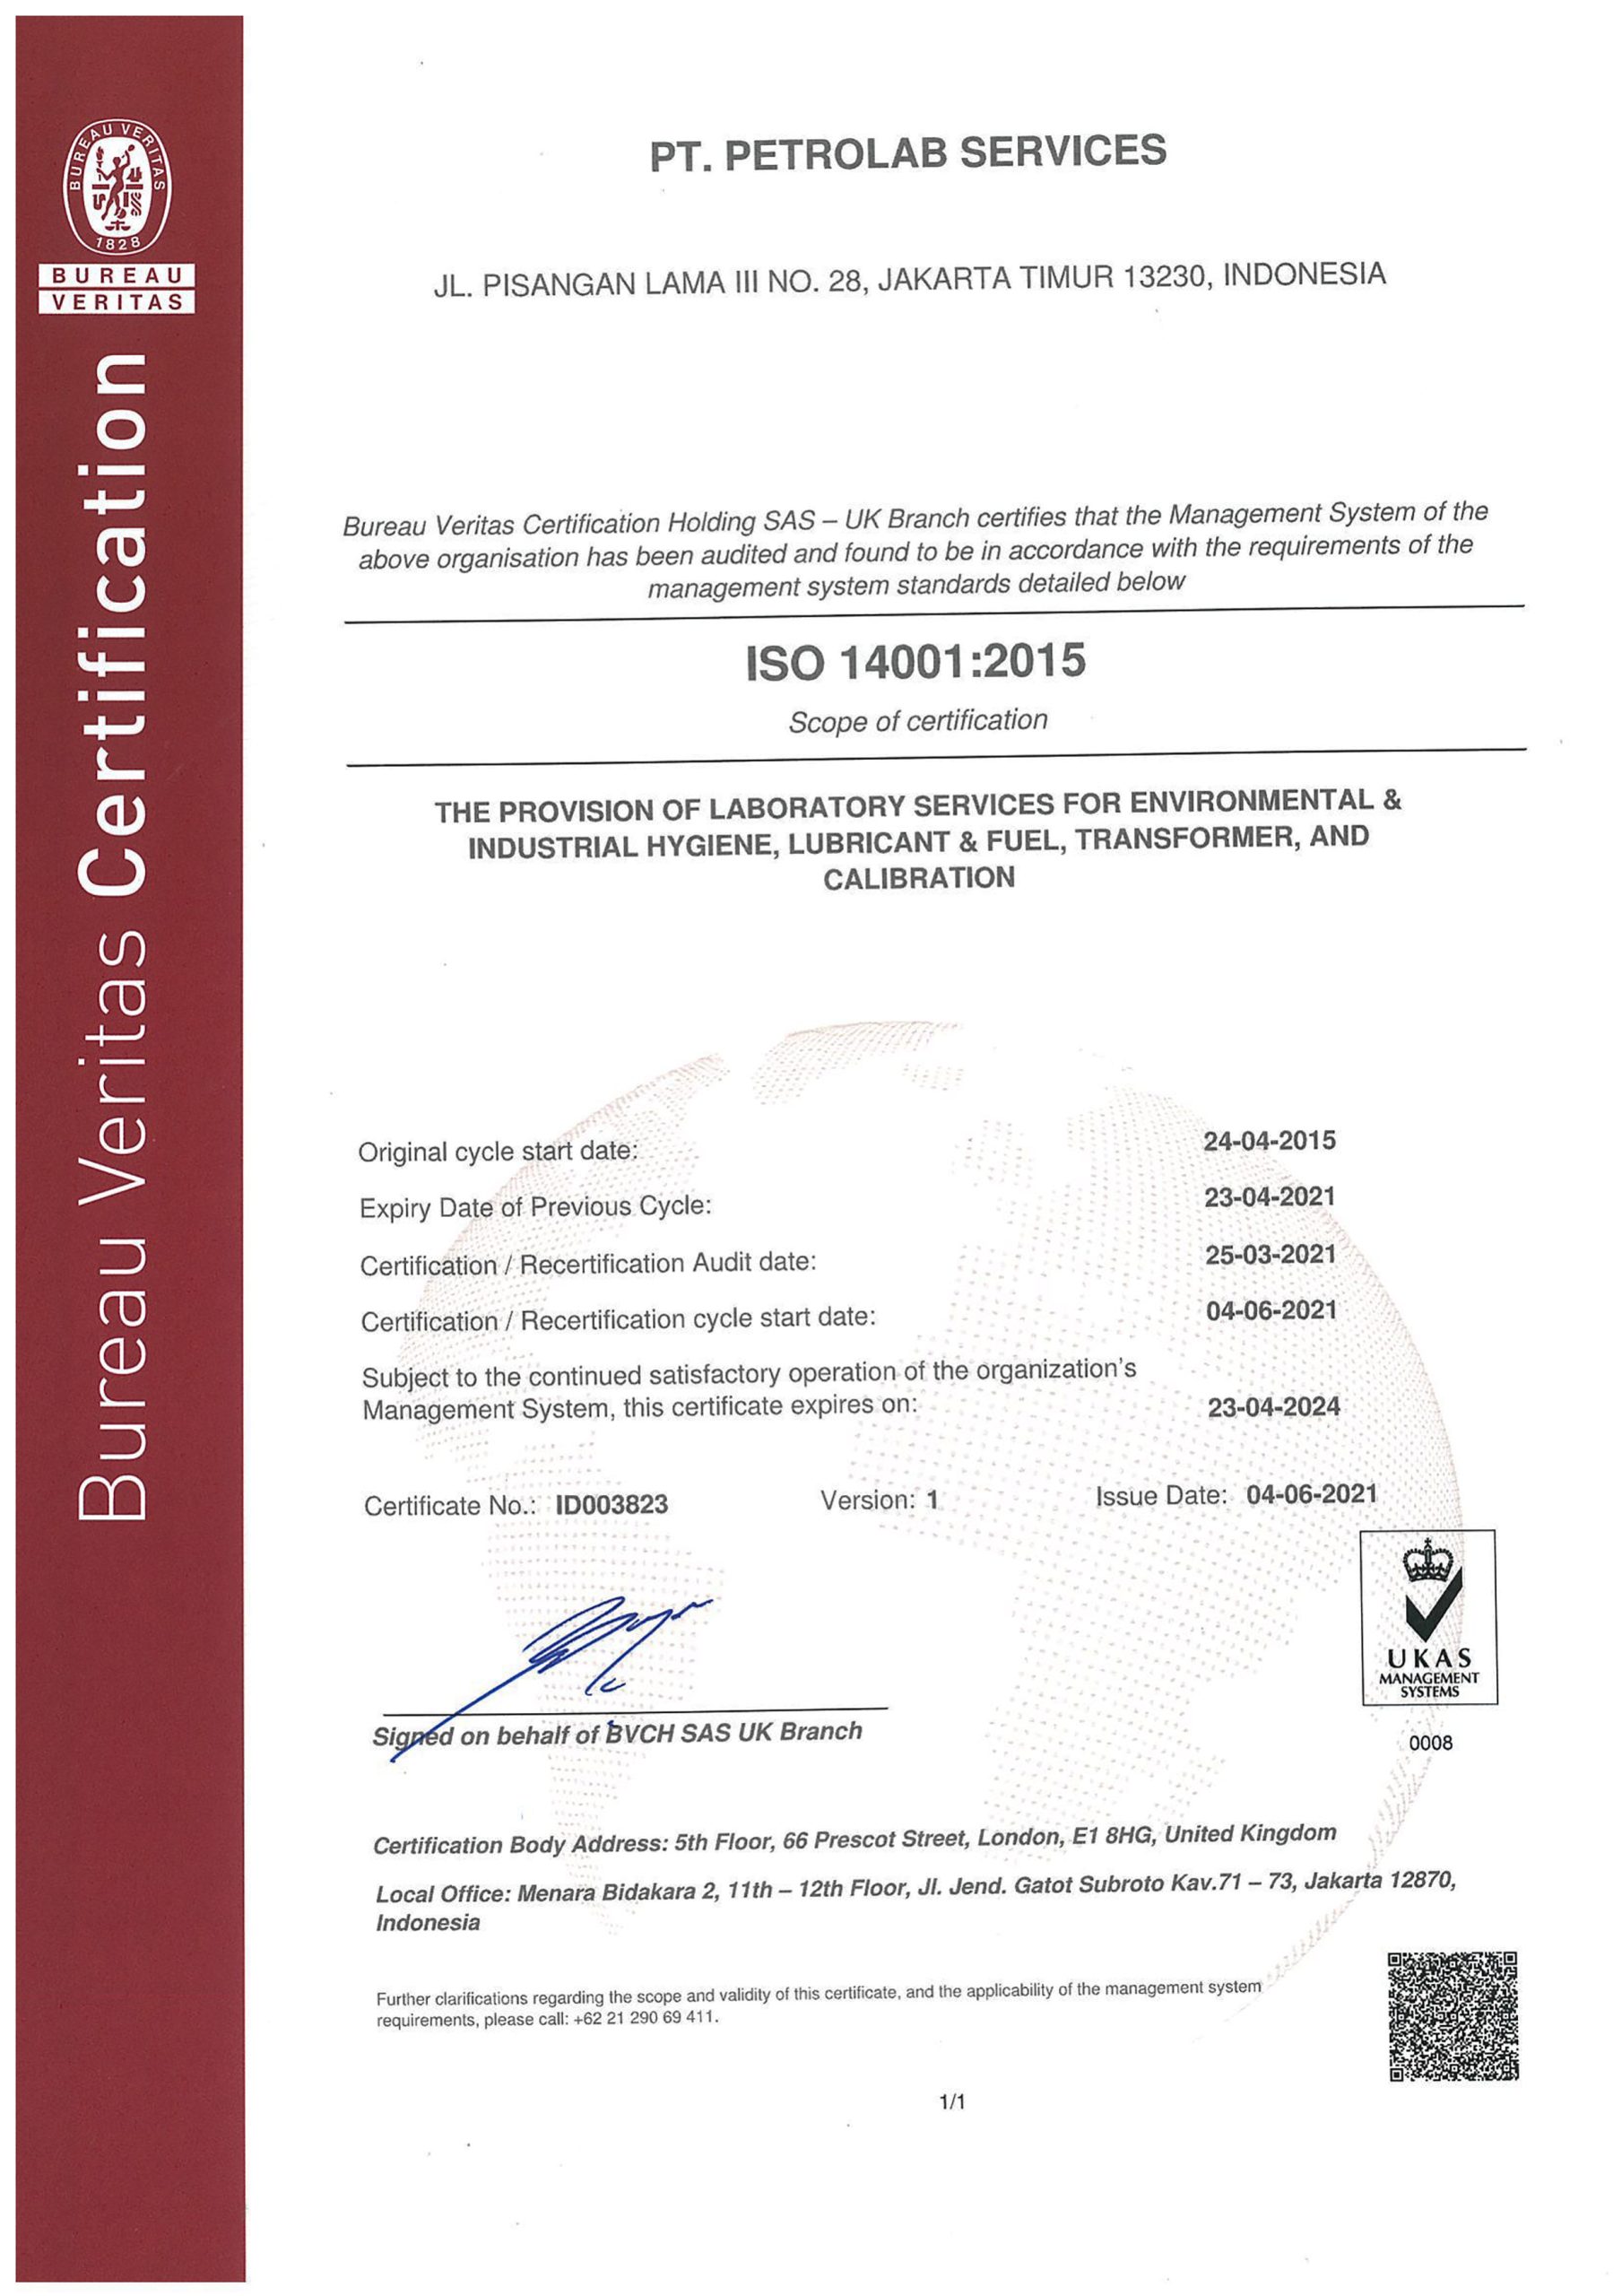 iso 14001:2015